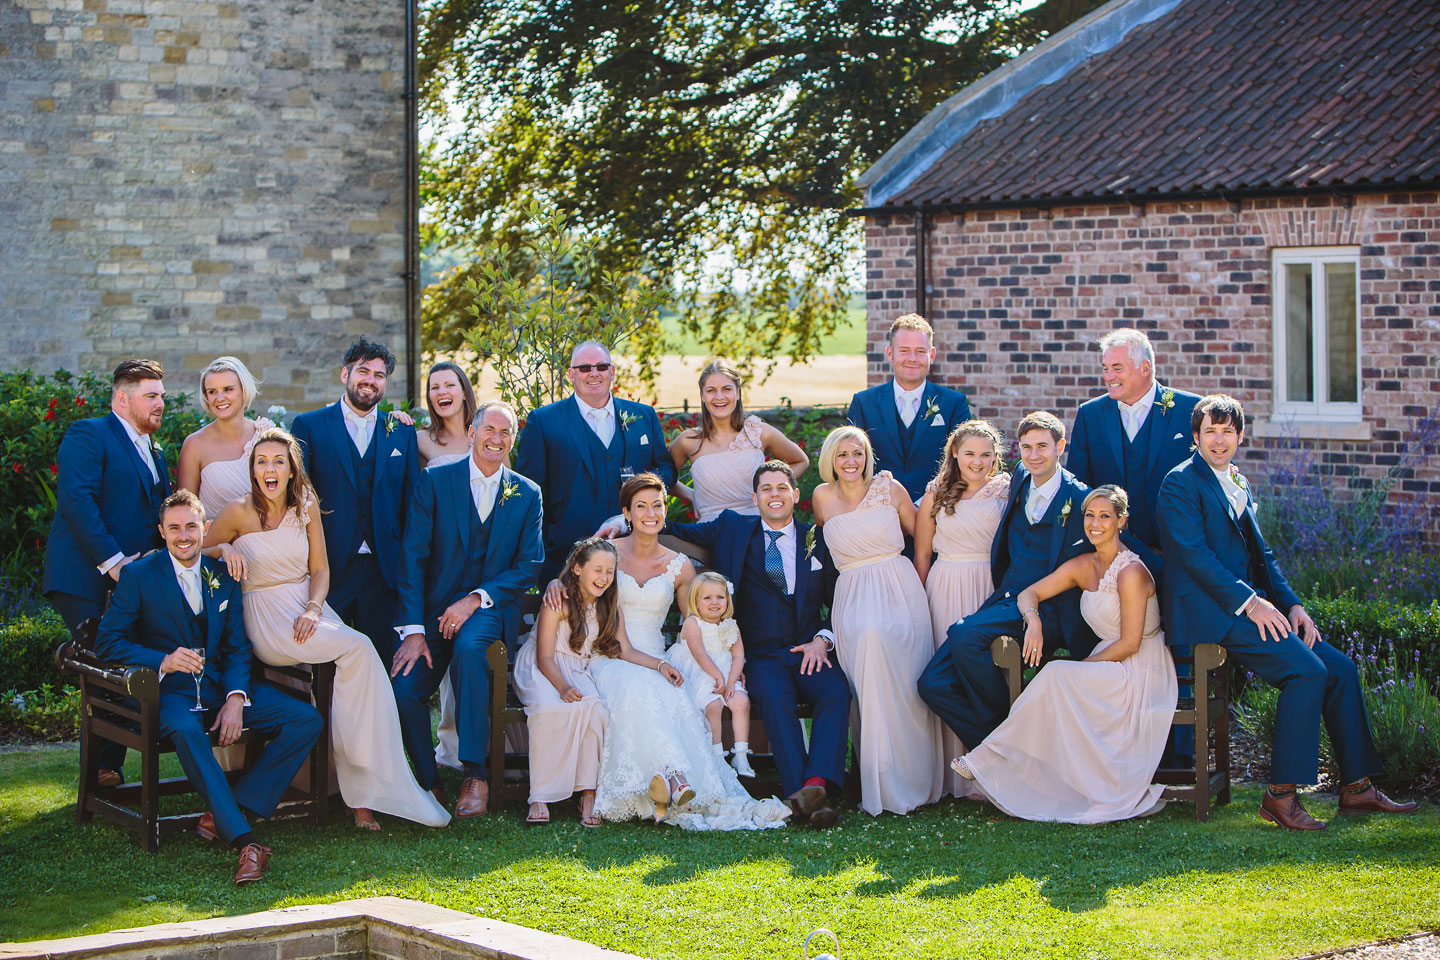 A wedding photograph of a fun & funky groupshot at Priory Cottages wedding venue near Tadcaster and Wetherby in Yorkshire